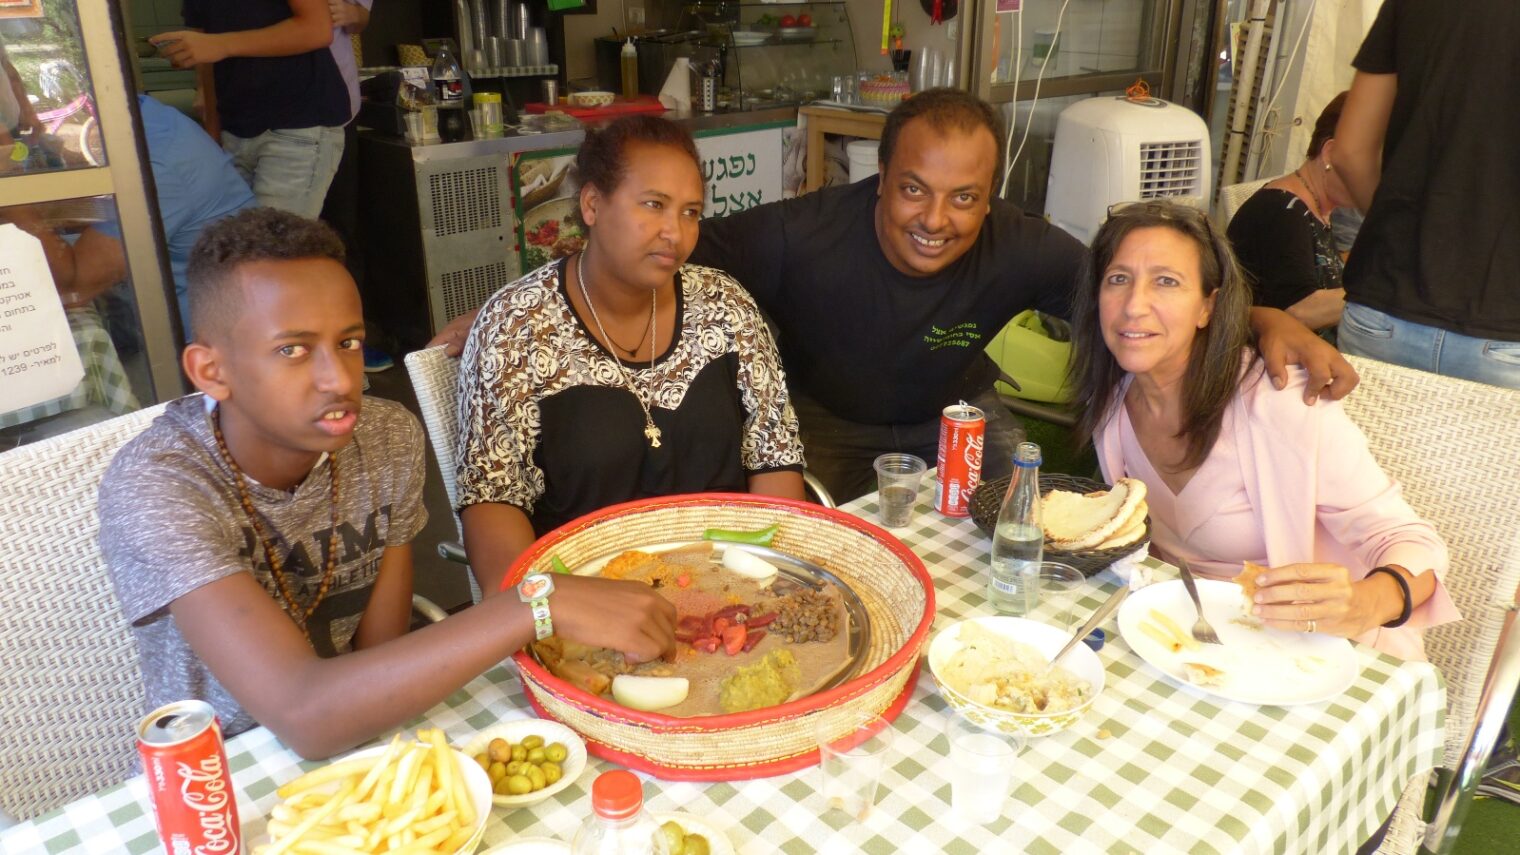 Lori Bacher with Nobel and his mother and restaurateur Asi Zaoda at Zaoda’s Ra’anana eatery. Photo by Doron Bacher